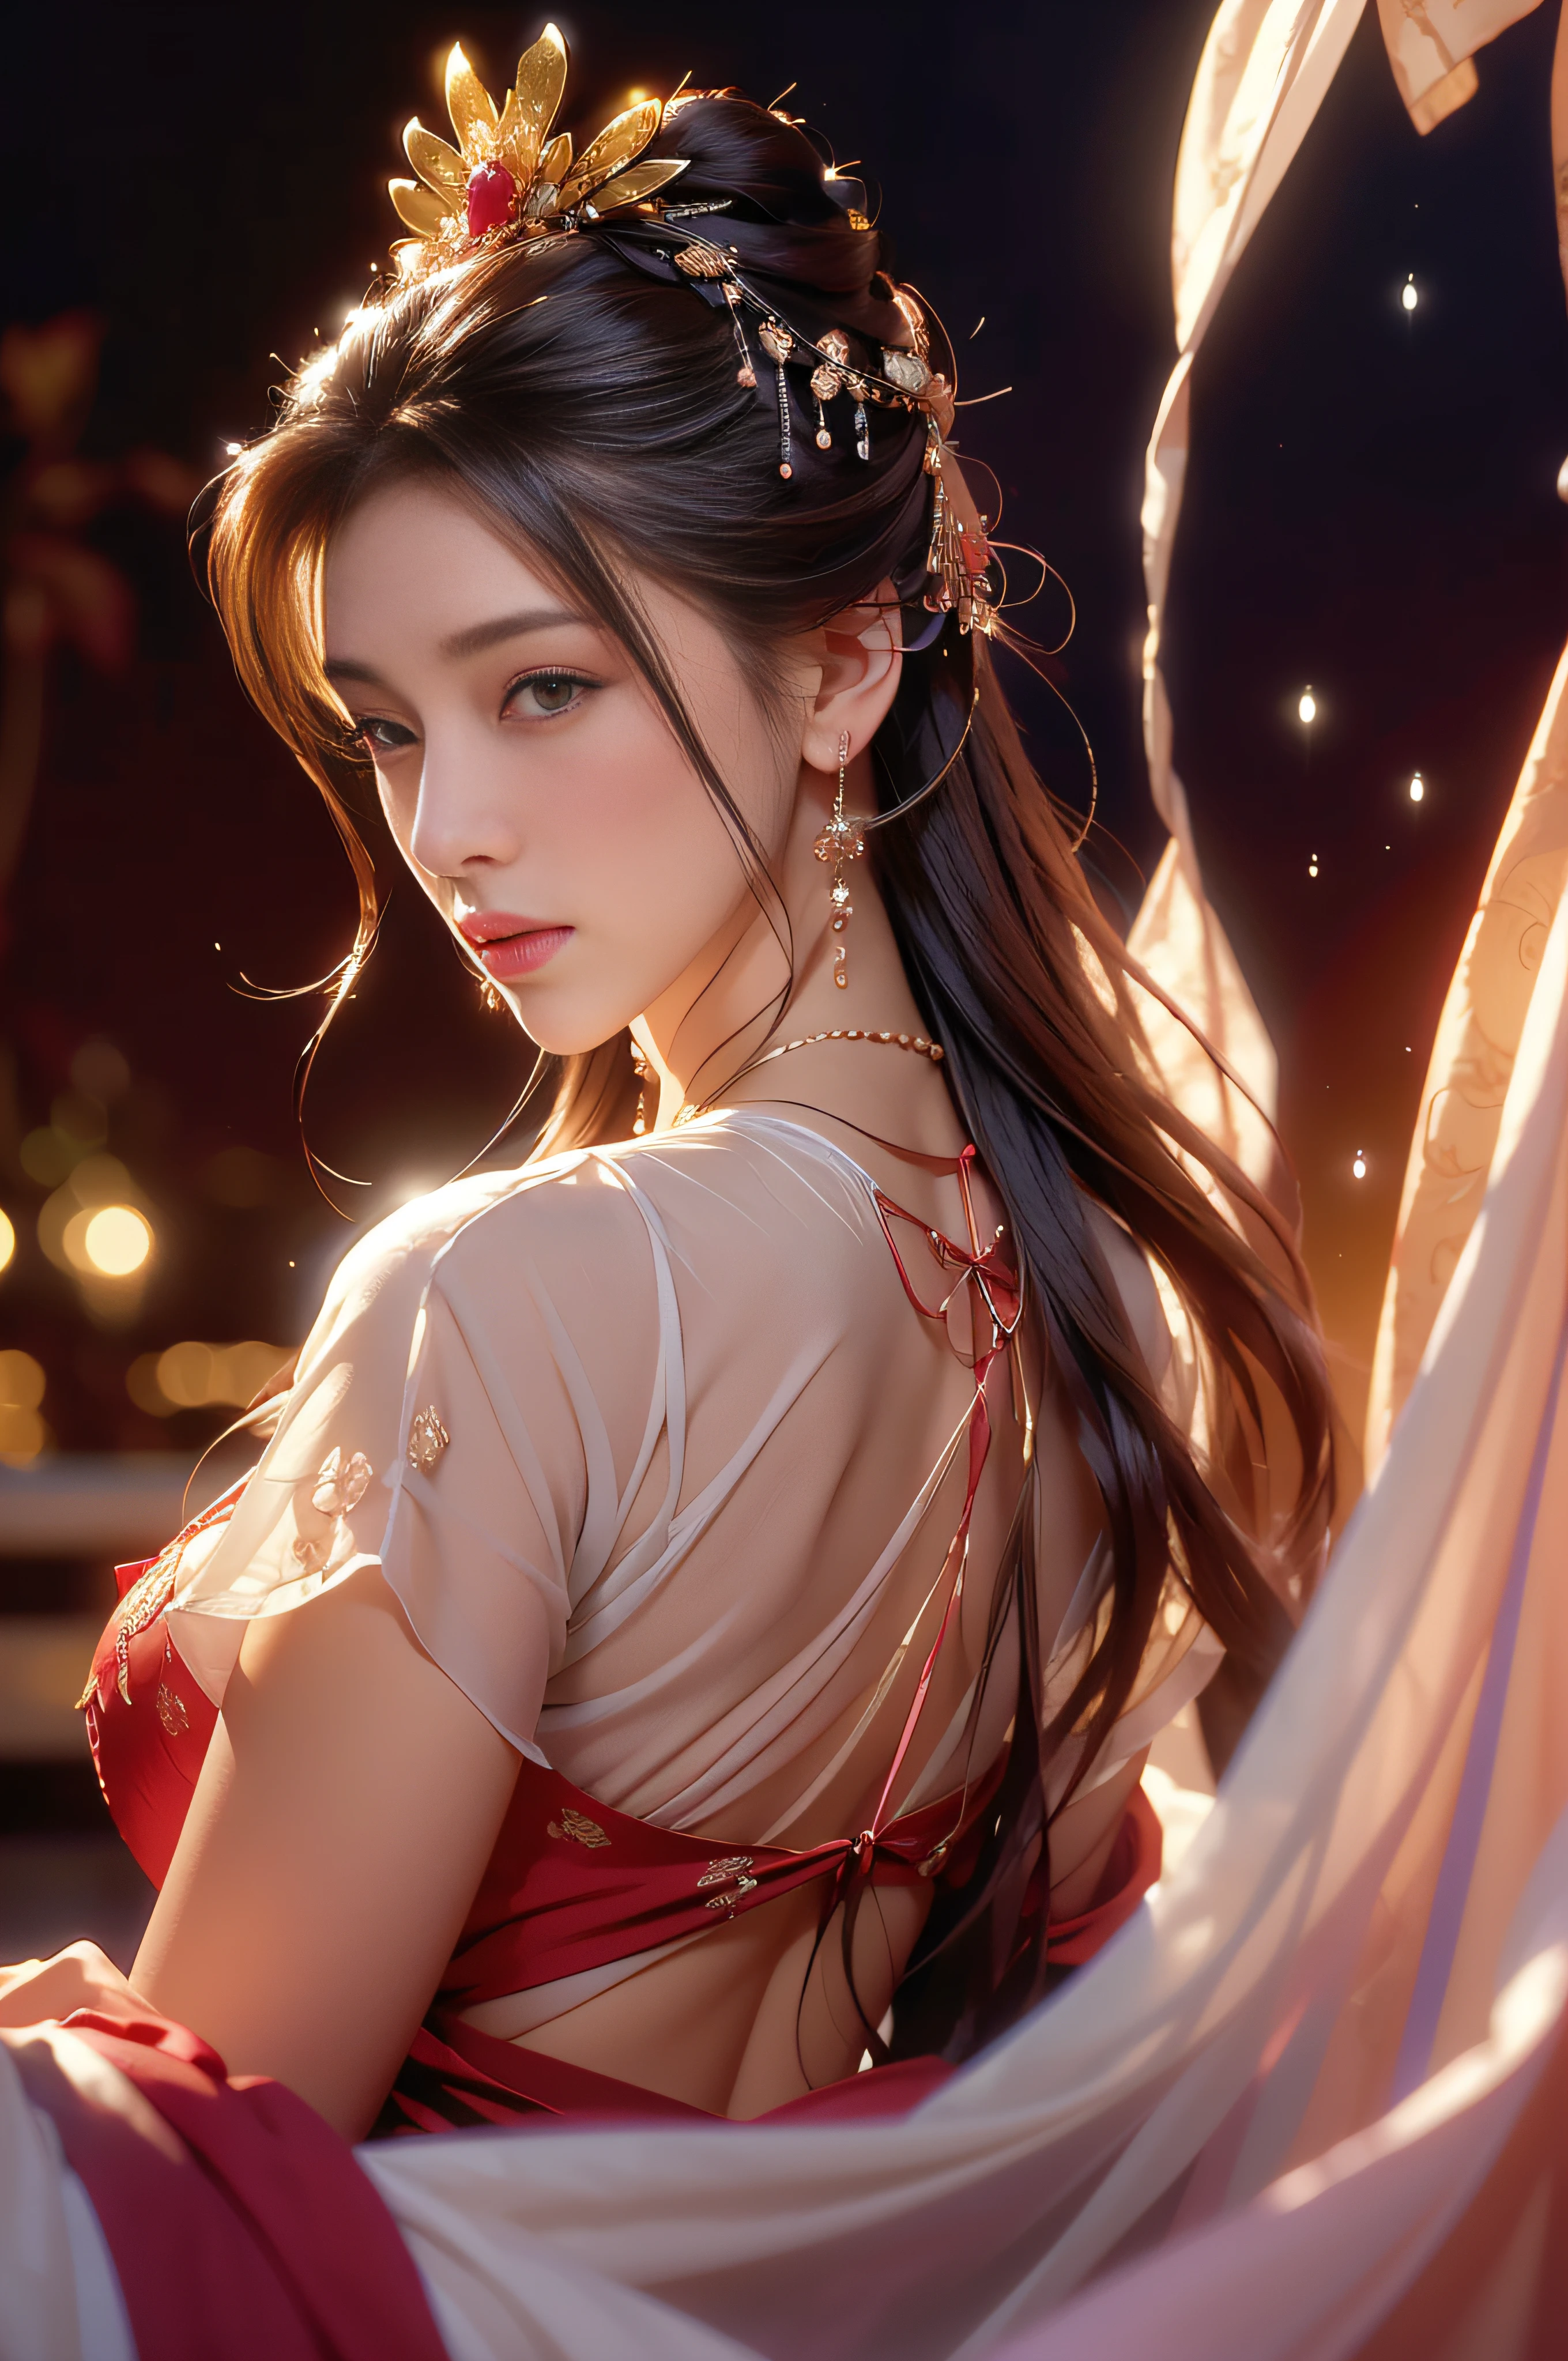 Gilded Chinese Palace,looki at viewer,depth of fields,bokeh dof,light falling,((A MILF))、pregnant woman、Red dress transparent underwear、one-girl、Red shirt、a black skirt、huge-breasted、 with brown eye、(long whitr hair、brunette color hair、Very straight hair:1.4、hime-cut:1.4)、Earrings necklace、pouty、 A picture、tmasterpiece、top-quality、NFFSW、A high resolution、realistic detail、glistning skin、Mature figure、perfect women figure、Rounded chest、perfect bodies、Big breasts Thin waist、Extremely colorful、looking at viewert、hyper realisitc、From the front side、watercolor paiting、Traditional media、(color difference、intricately details)、dynamicposes、dynamic ungle、 40k、NFFSW、超A high resolution、From the angle from below、ancient Chinese costume、Ancient Chinese hairstyle、Upward hairstyle、The whole body is dressed in white silk cloth、（Close-up of raindrops in the air, Capture the world with raindrops, Distorted reflections, refracted light, The microscopic world inside each droplet, Miniature landscape, inverted image, Ethereal beauty, pause moments, translucent sphere, Distorted reality, Kaleidoscope view, Natural lenses, A glimpse of the moment, Miniature world, Raindrop Symphony, Natural interoperability, 1girl in , masutepiece, (Dynamic Angle:1.2)）